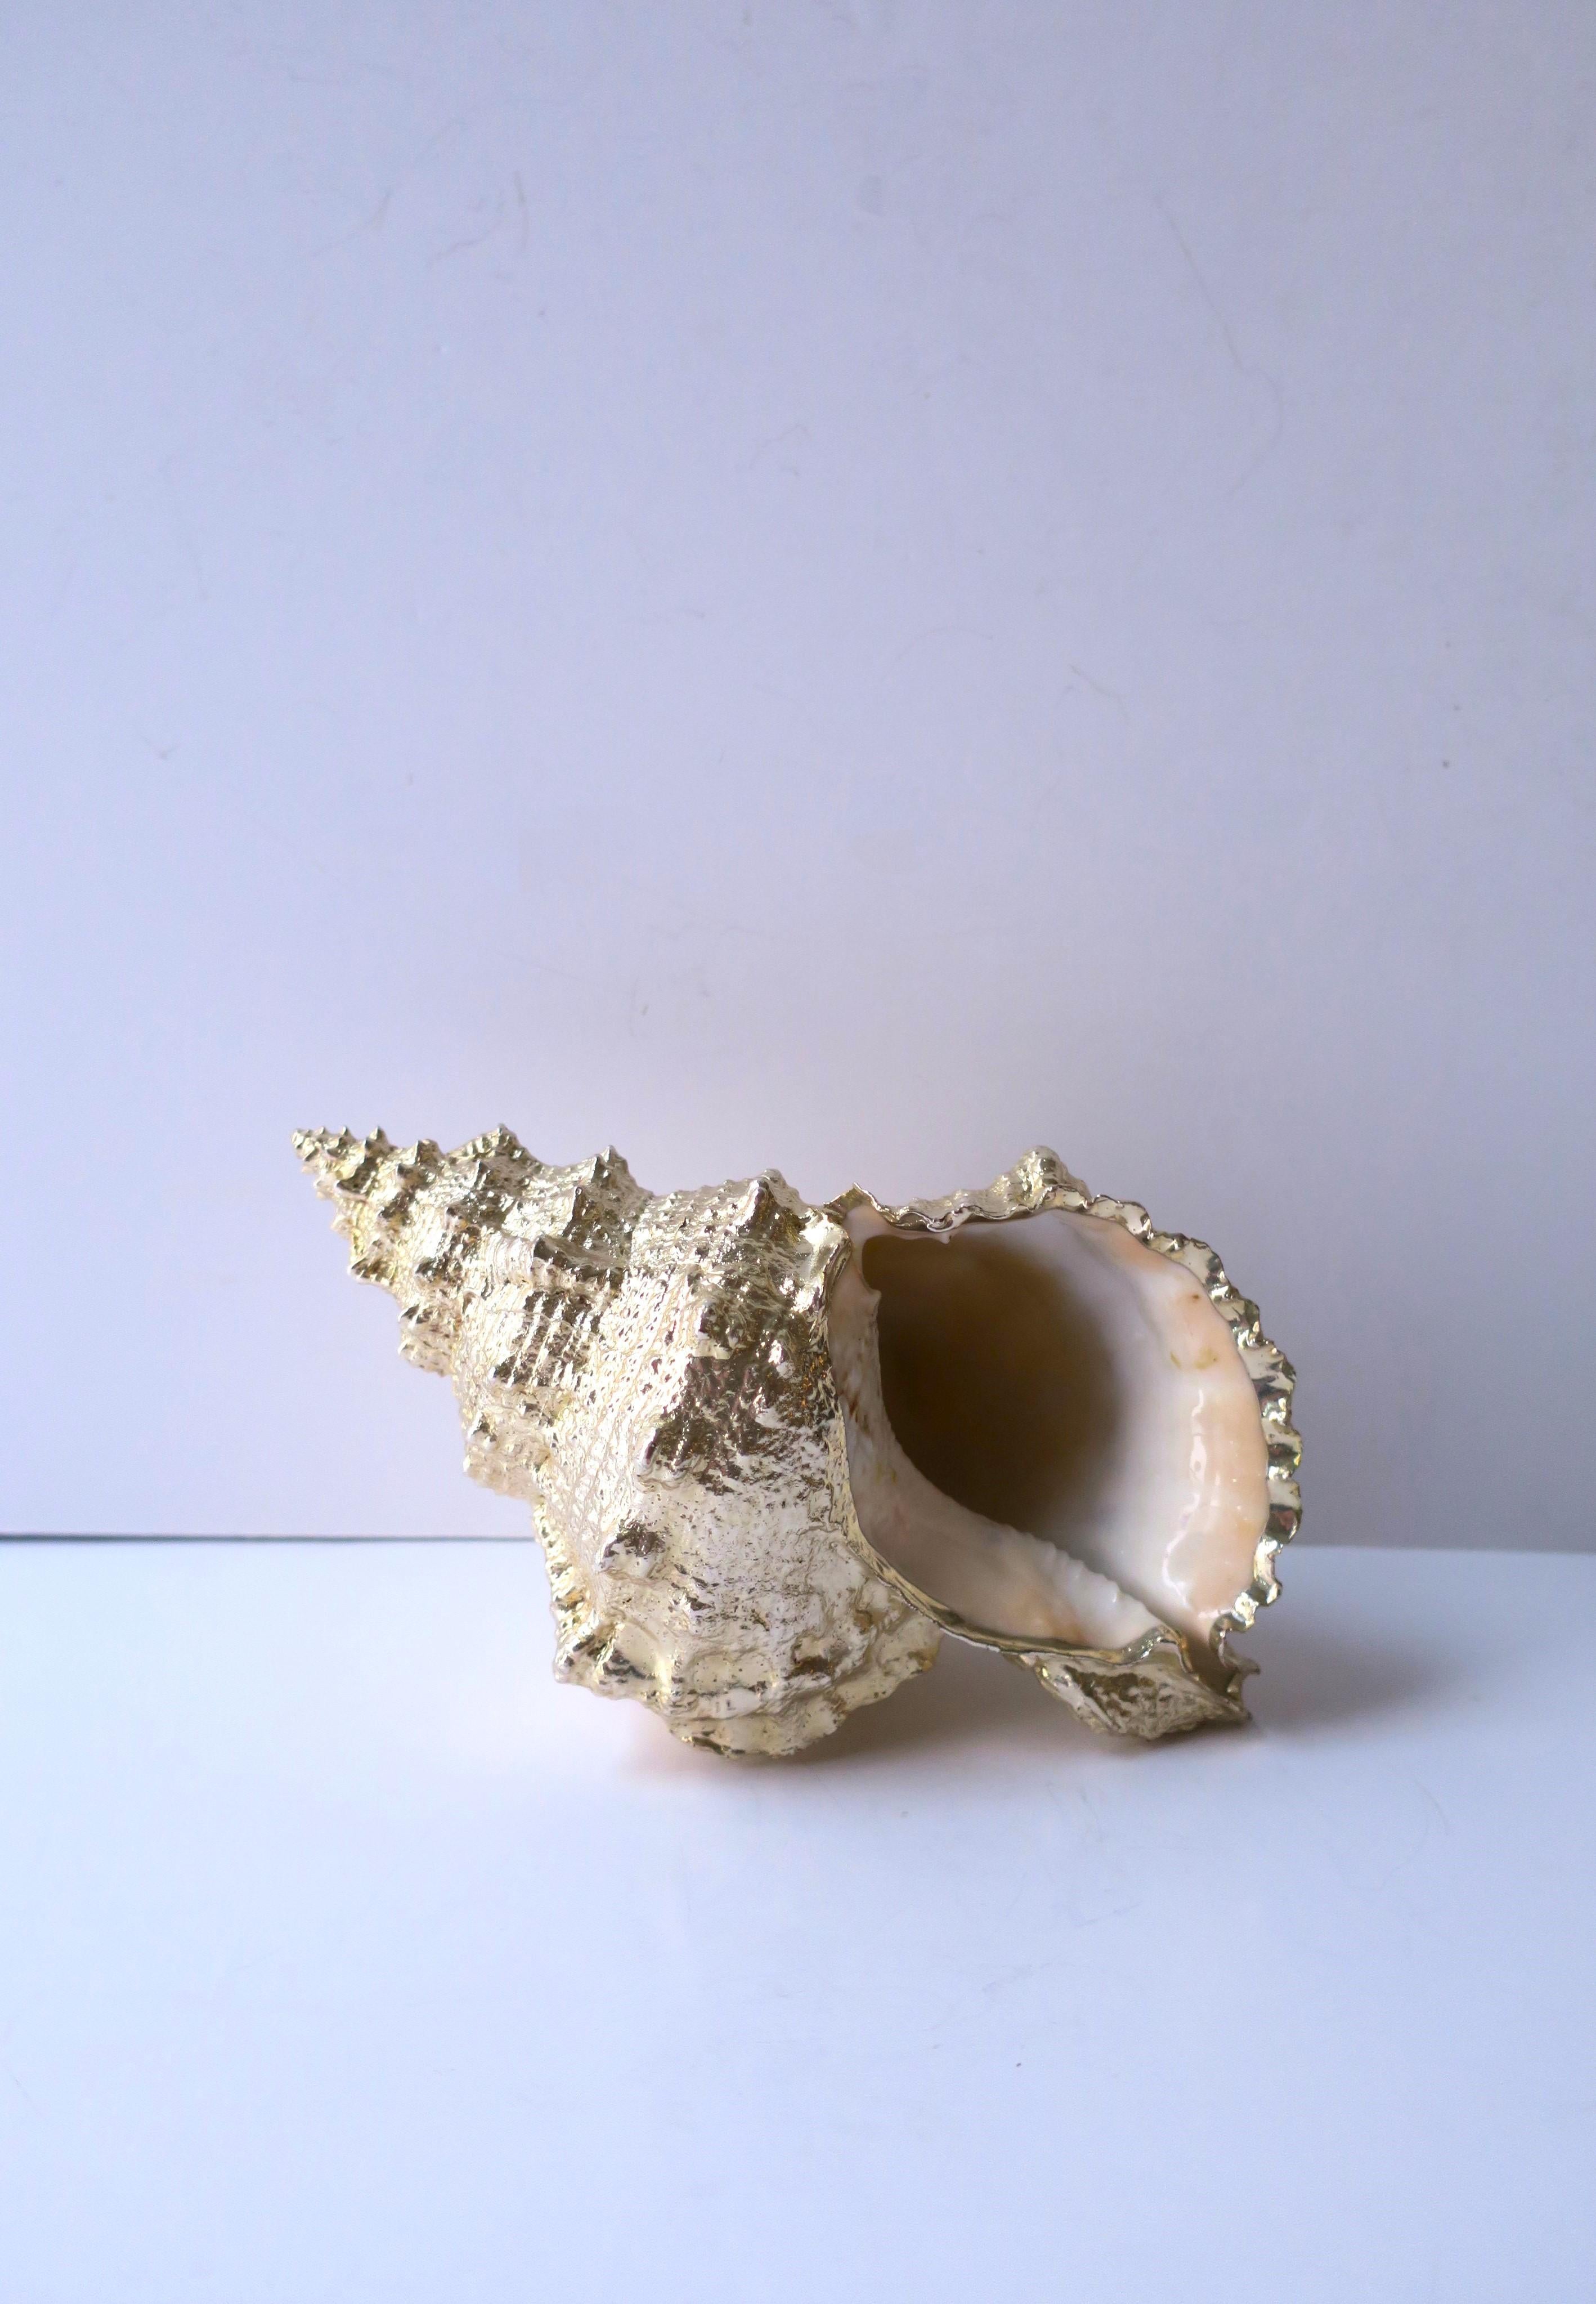 A beautiful natural seashell dipped in a light-gold finish. A great decorative object for a shelf, on top of books, cocktail table, a vanity or bath area, etc. Many areas. This natural seashell has been dipped a light-gold finish; underside area